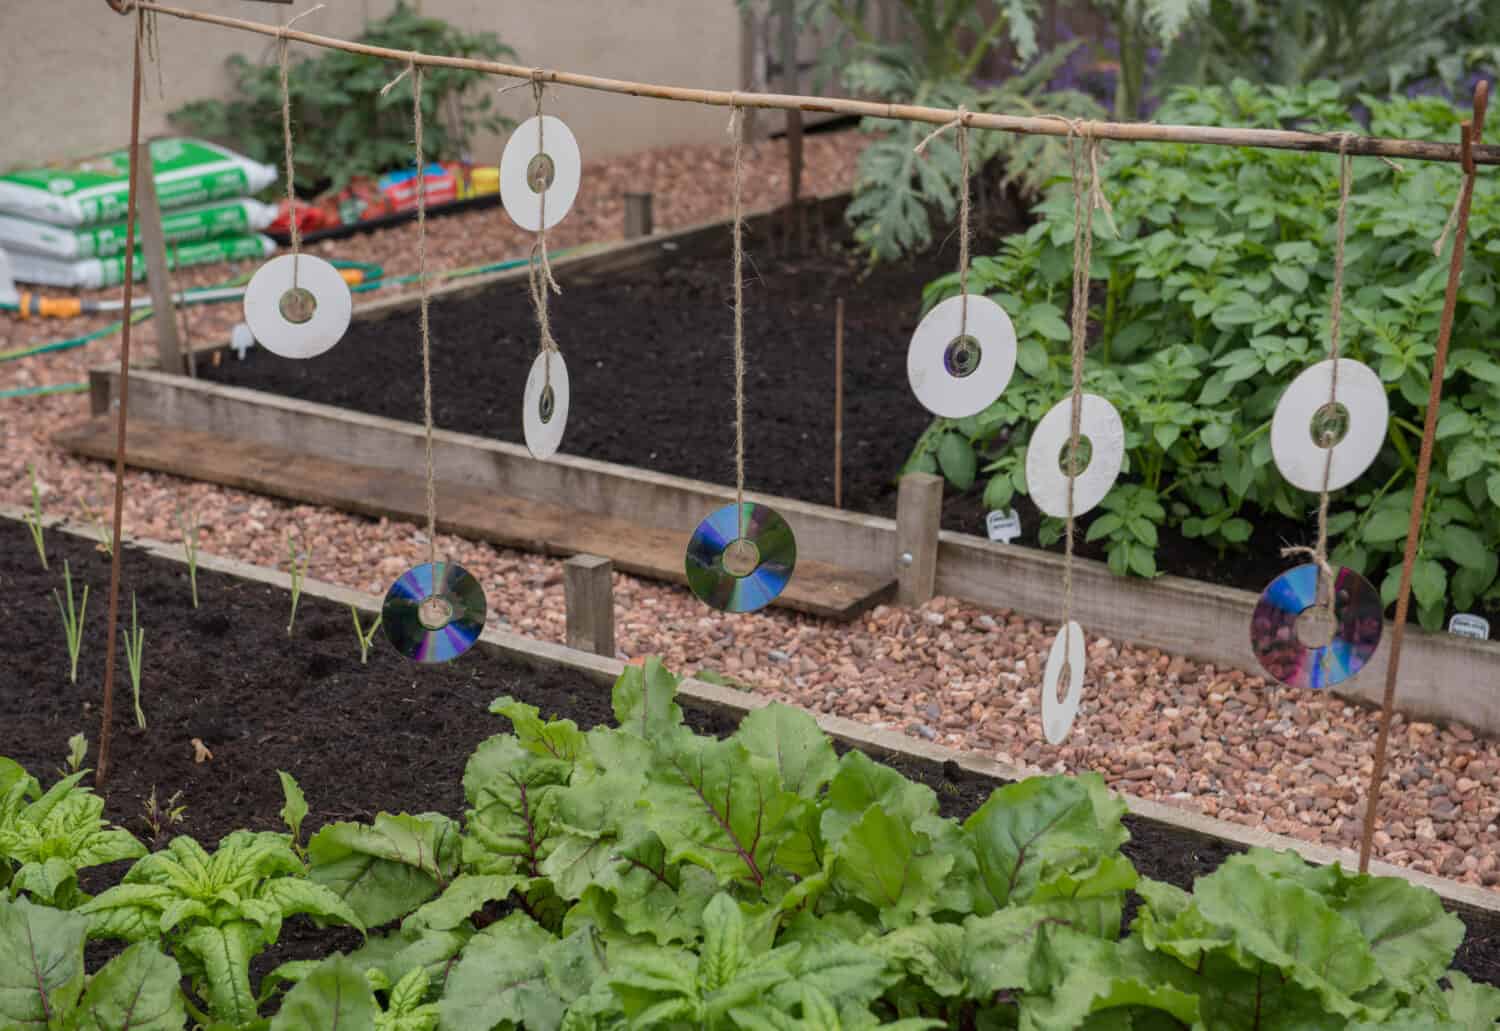 Blank CDs Hanging on a Bamboo Pole to Scare Birds from Eating Home Grown Organic Beetroot Plants on an Allotment in a Vegetable Garden in Rural Devon, England, UK